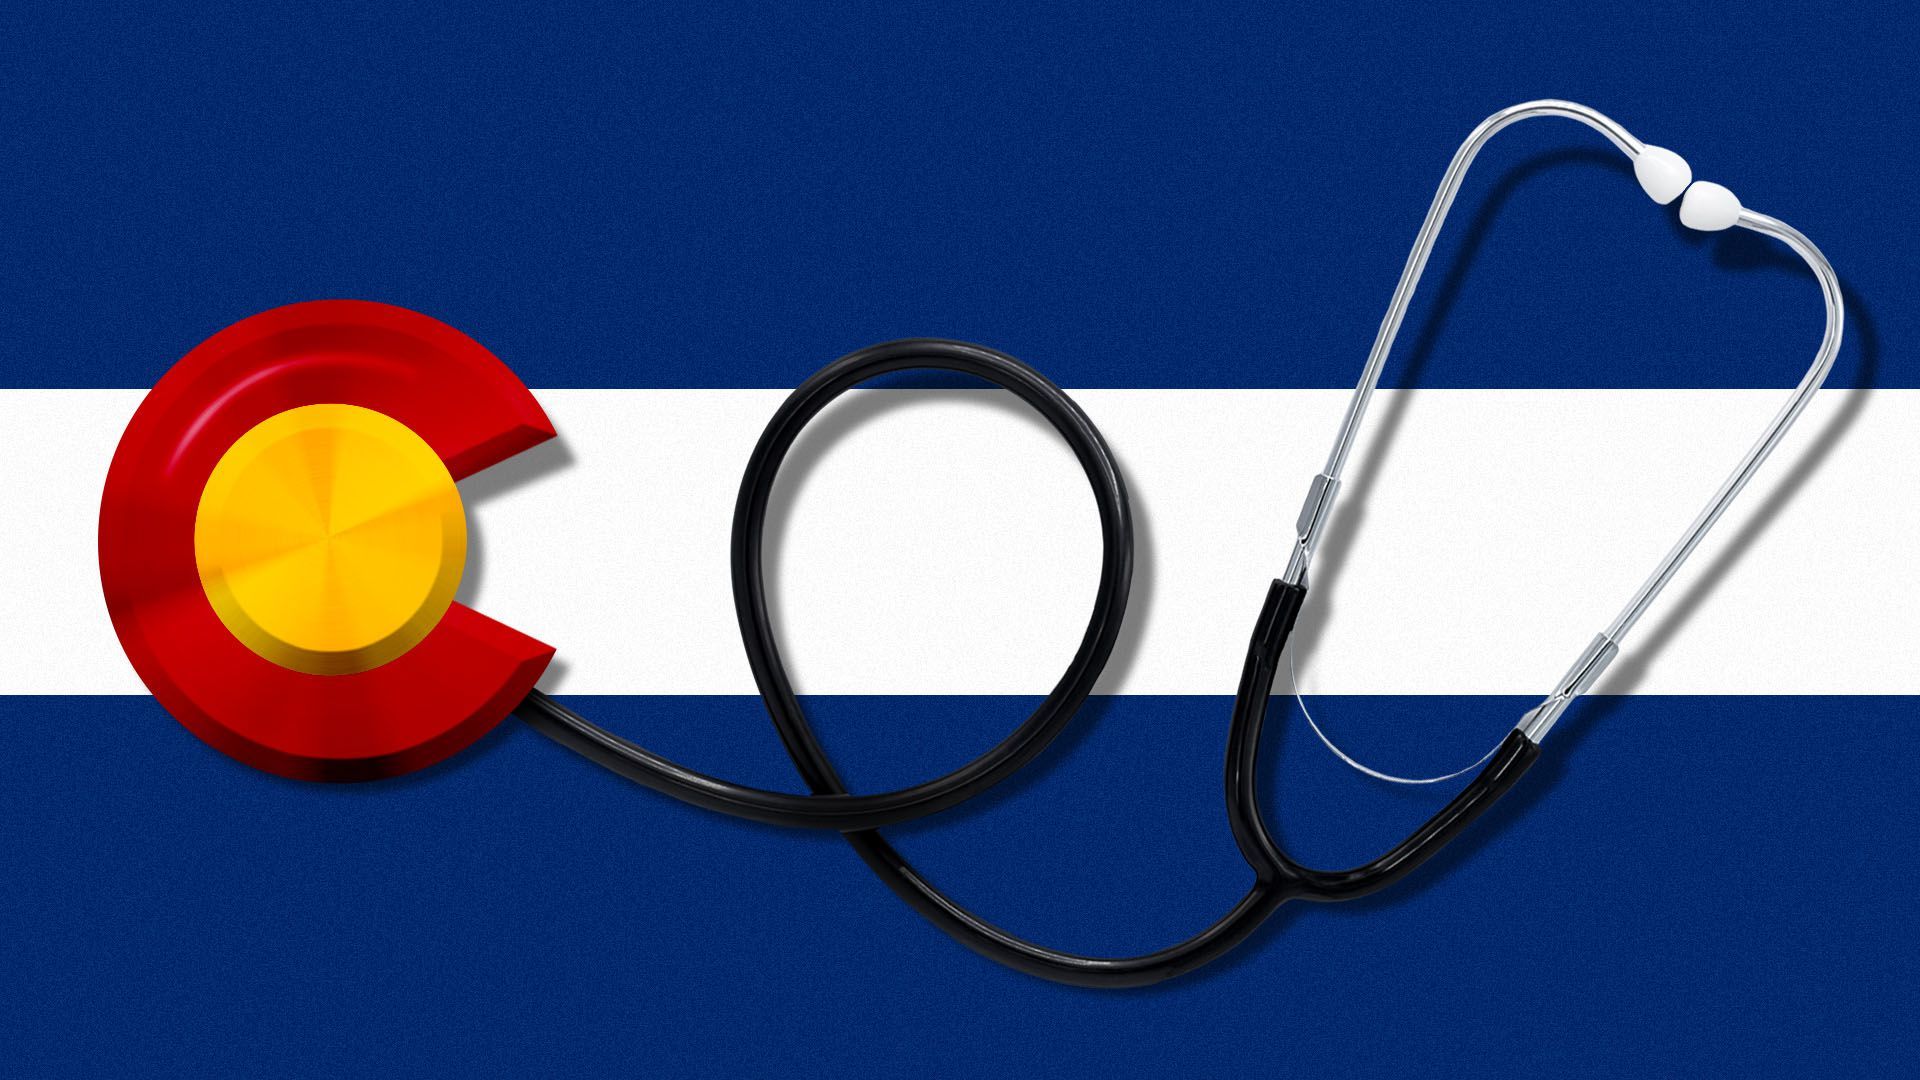 Illustration of a stethoscope in the shape of a Colorado flag